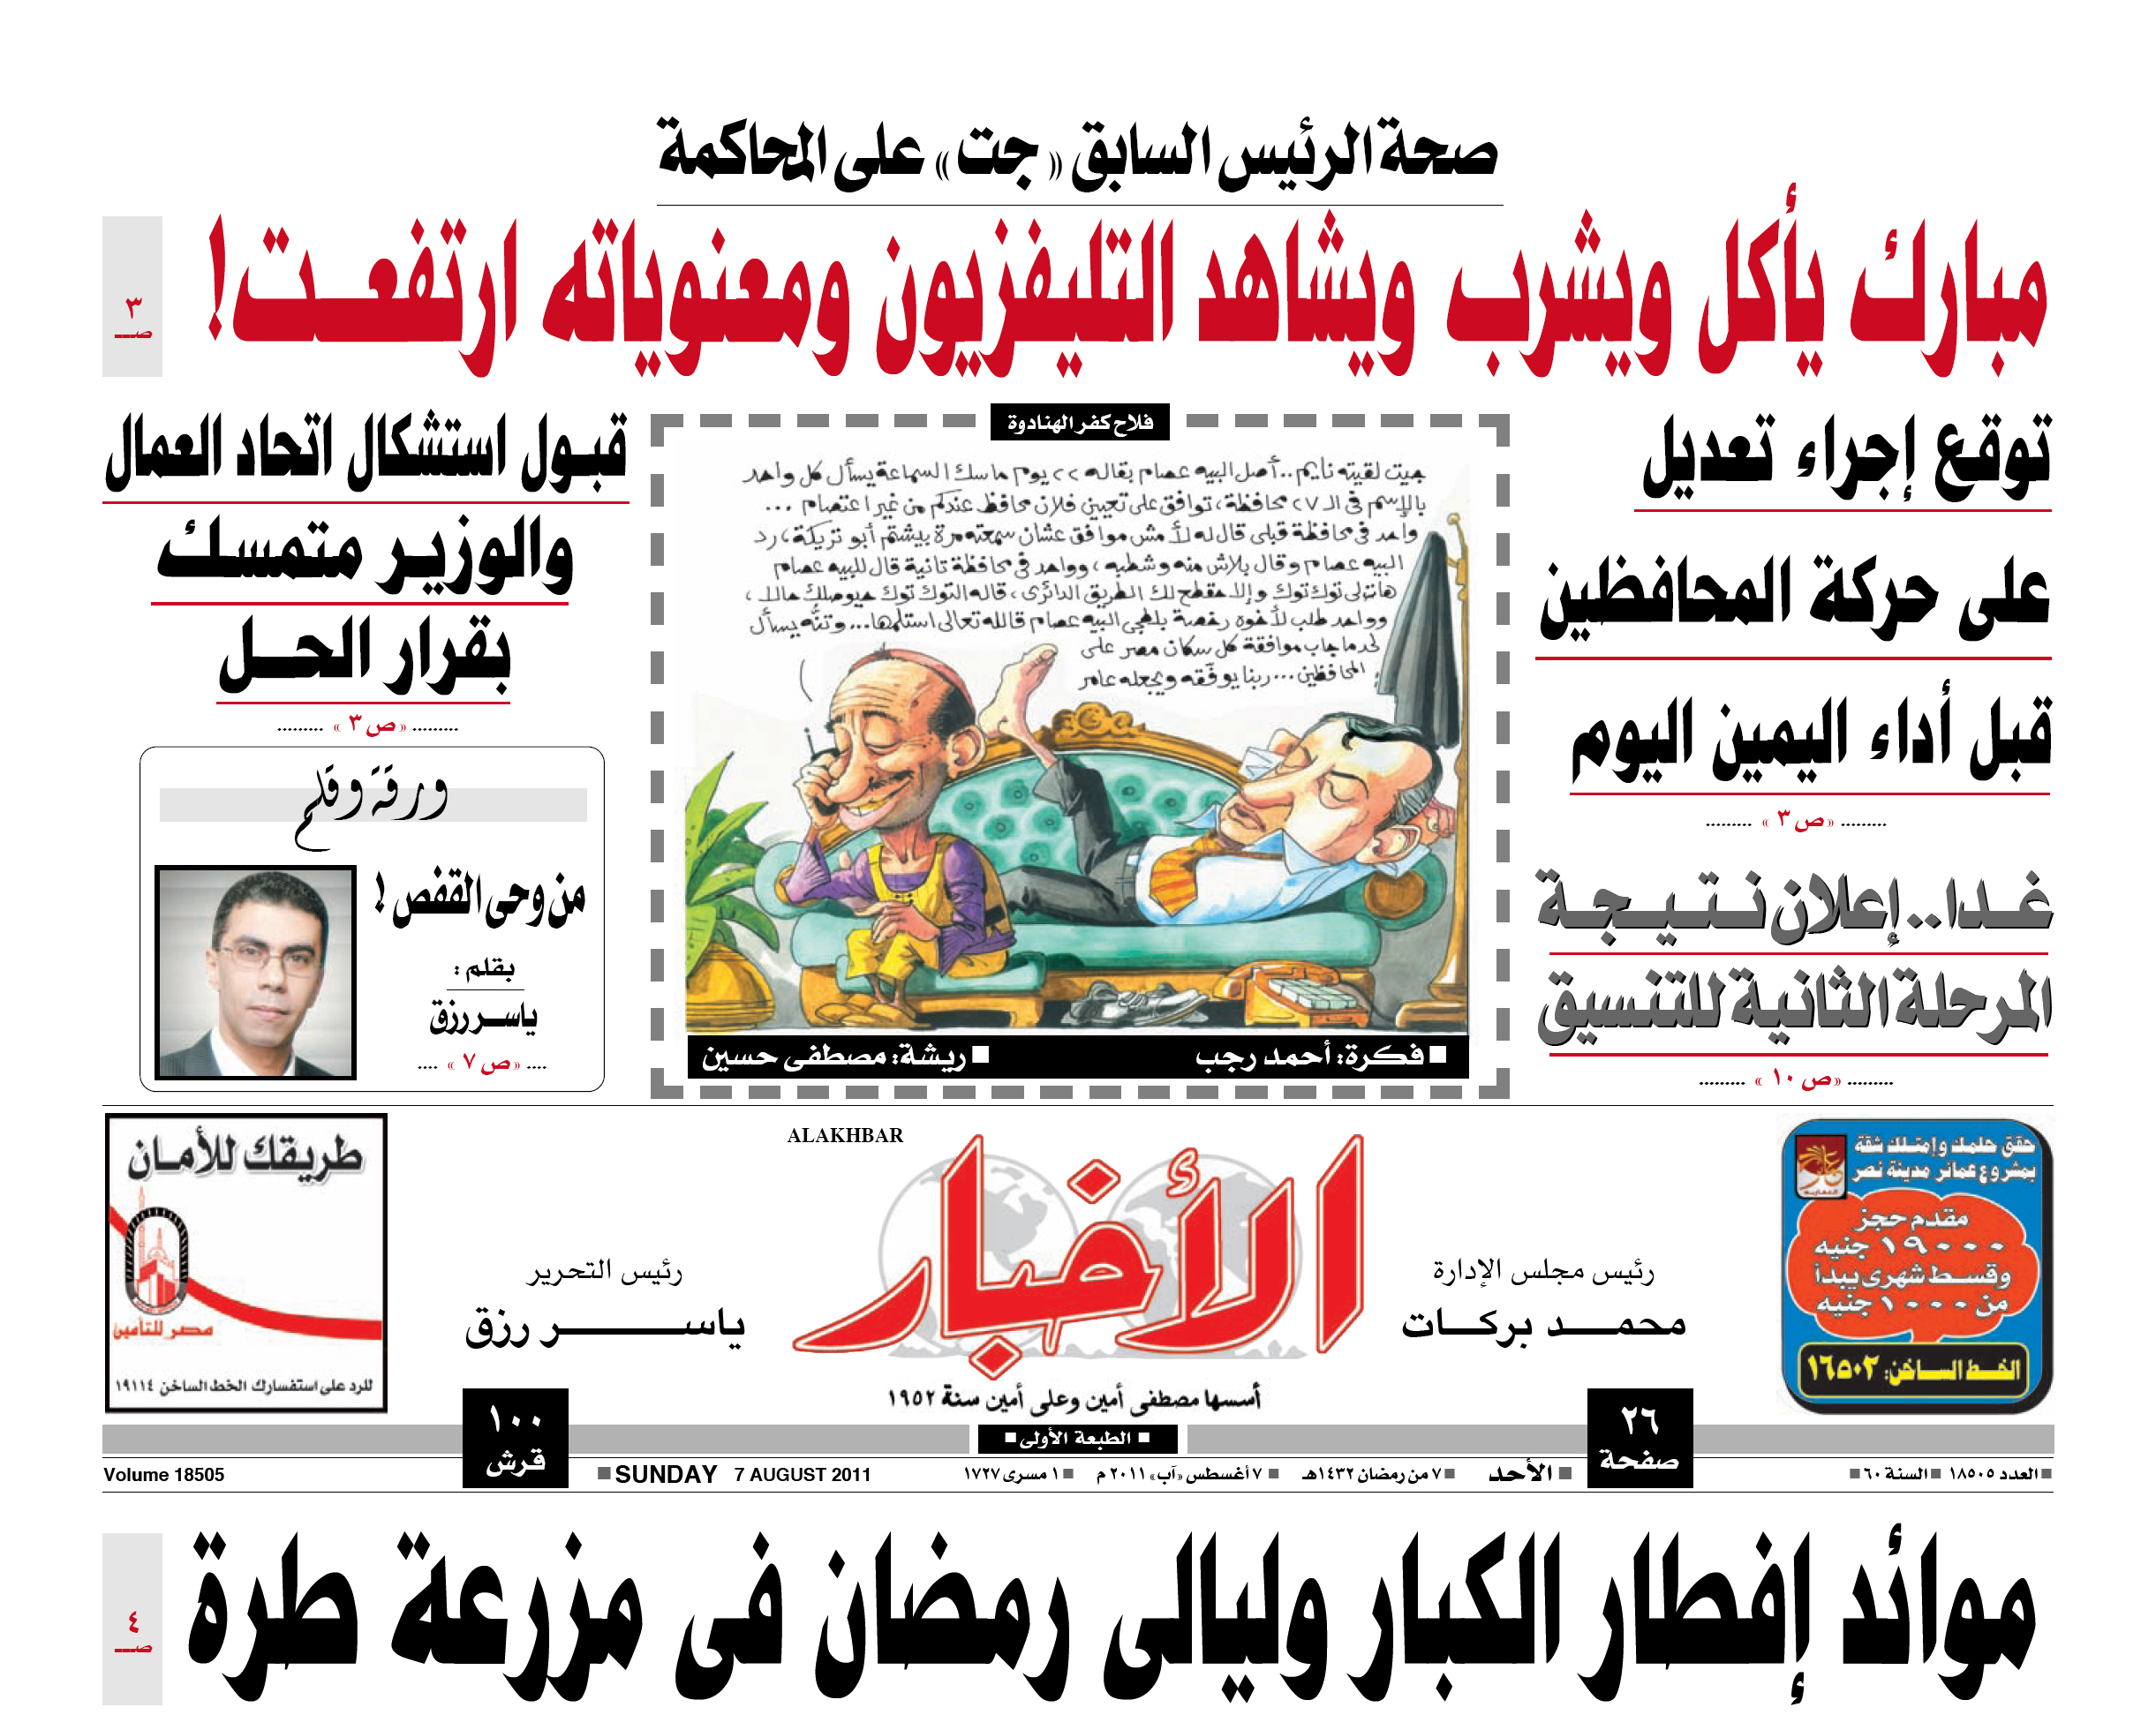 Mubarak's health as reported on the front page of the Egyptian daily Al-Akhbar, August 7, 2011.